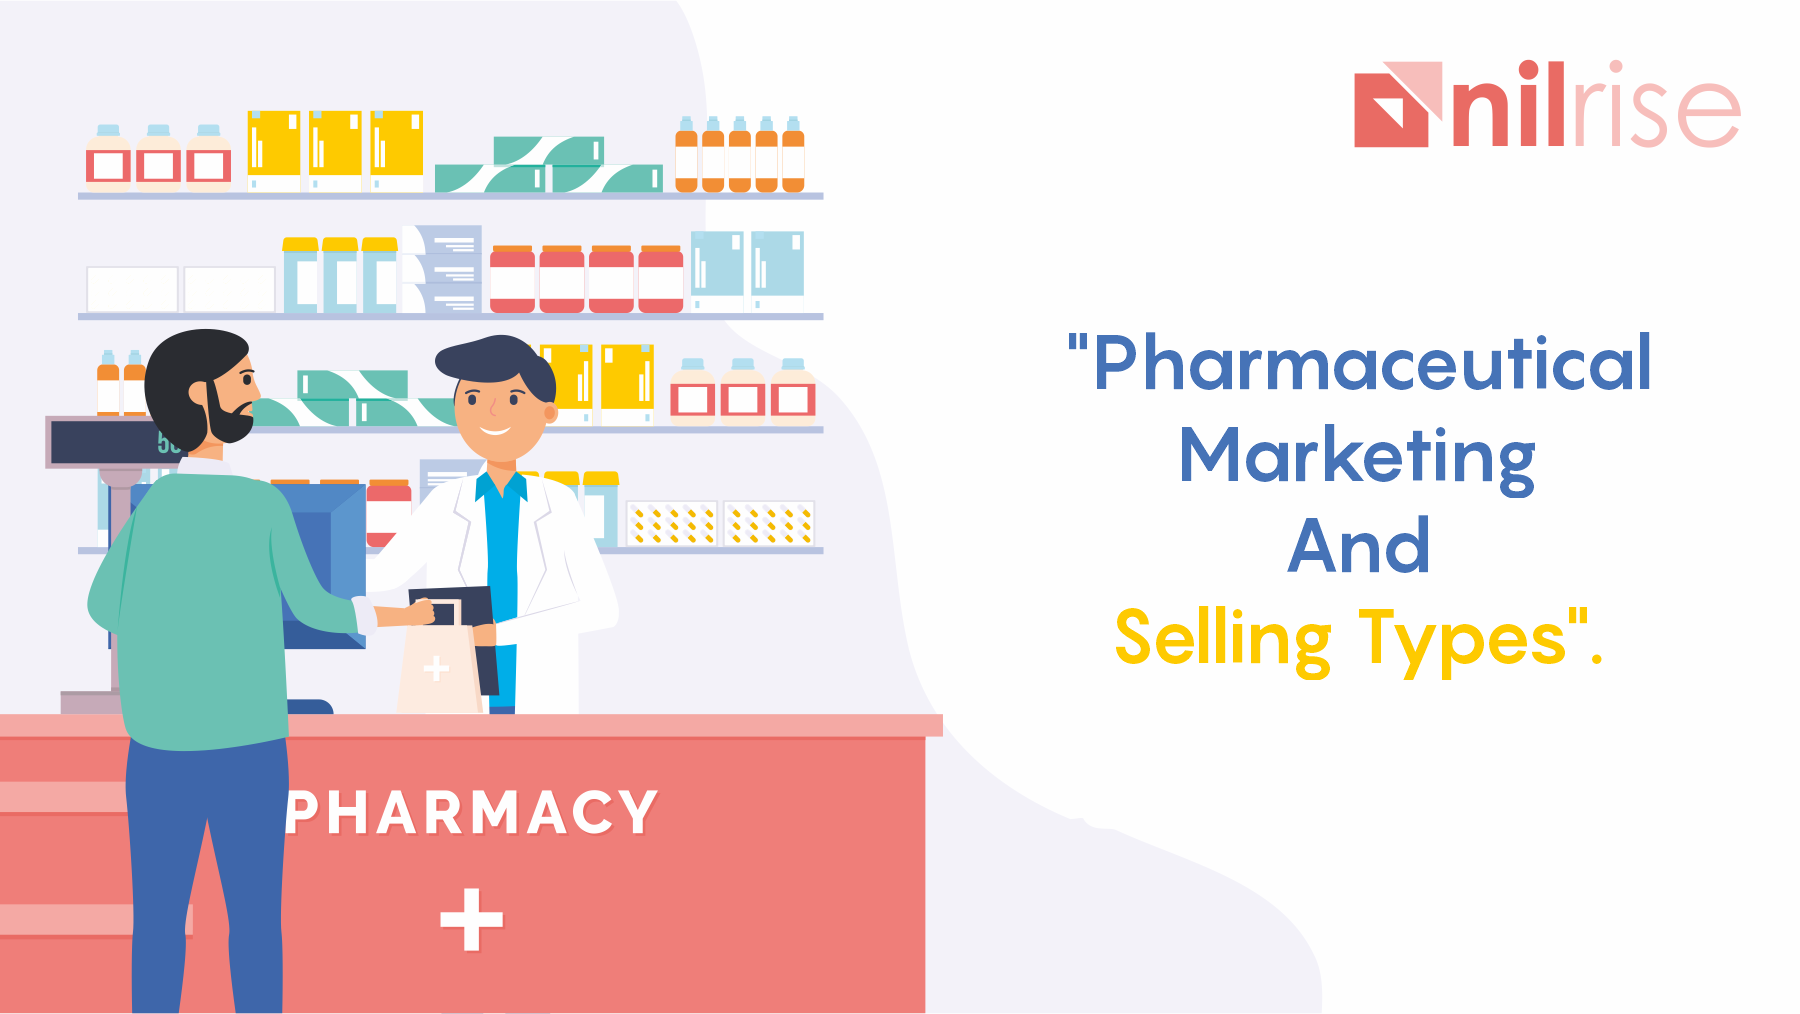 Pharmaceutical marketing and selling types